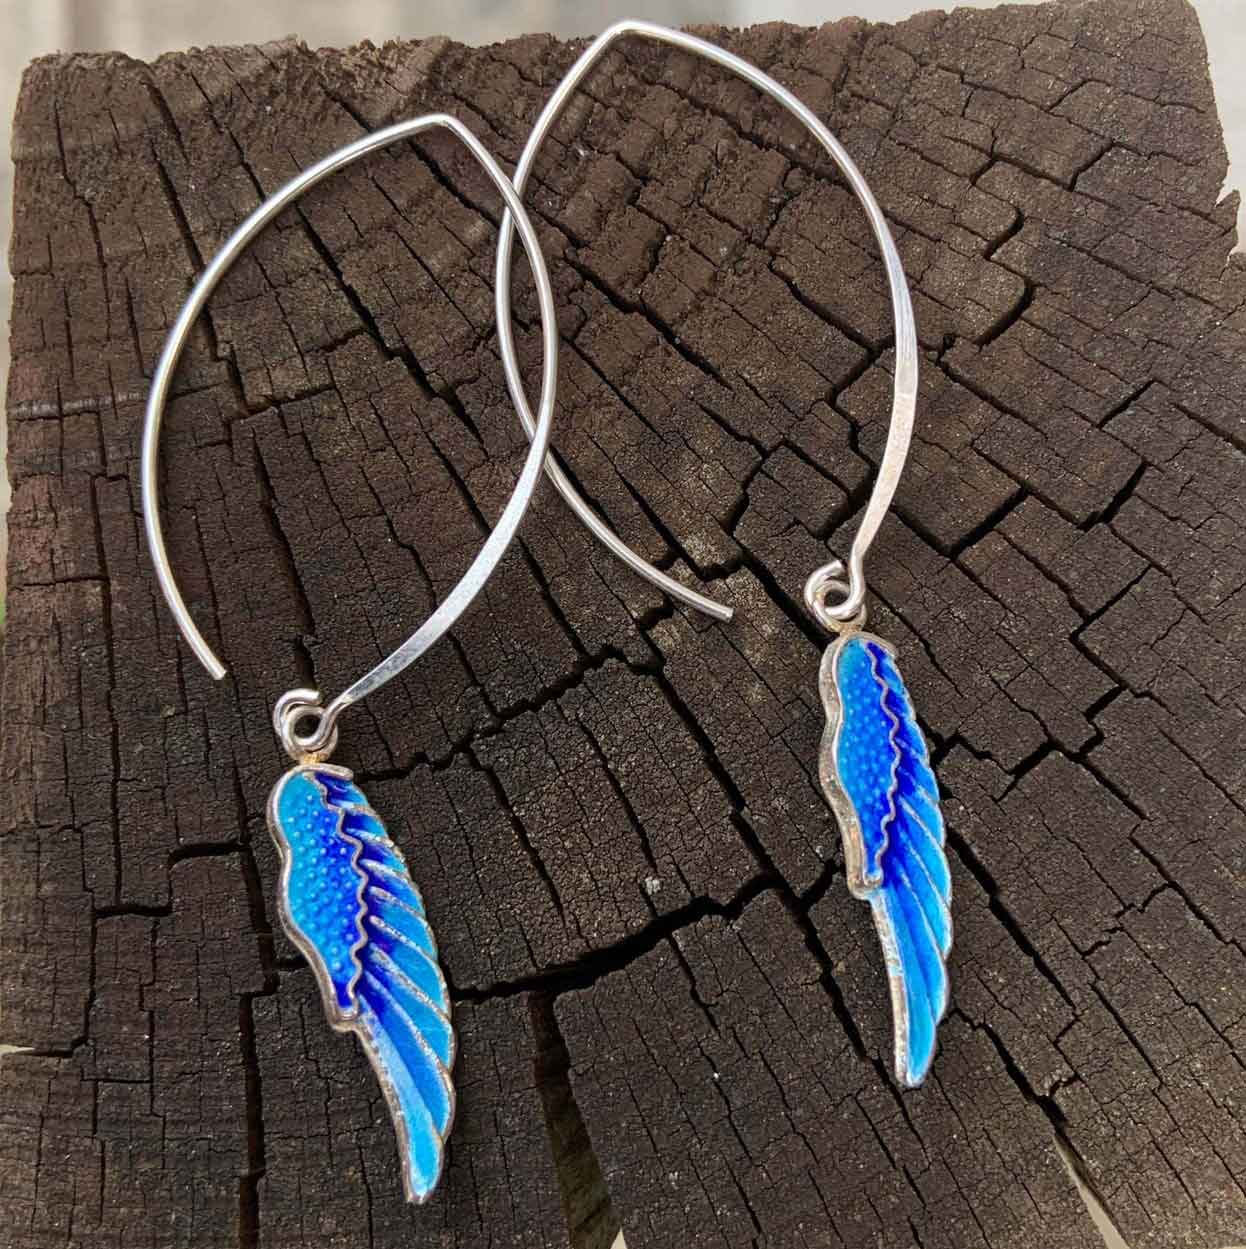 CLOISONNE ENAMEL SILVER Handmade Jewelry Set, Angel Wings Necklace and Earrings, Gift for Her, Love Jewelry, 925 Sterling Silver